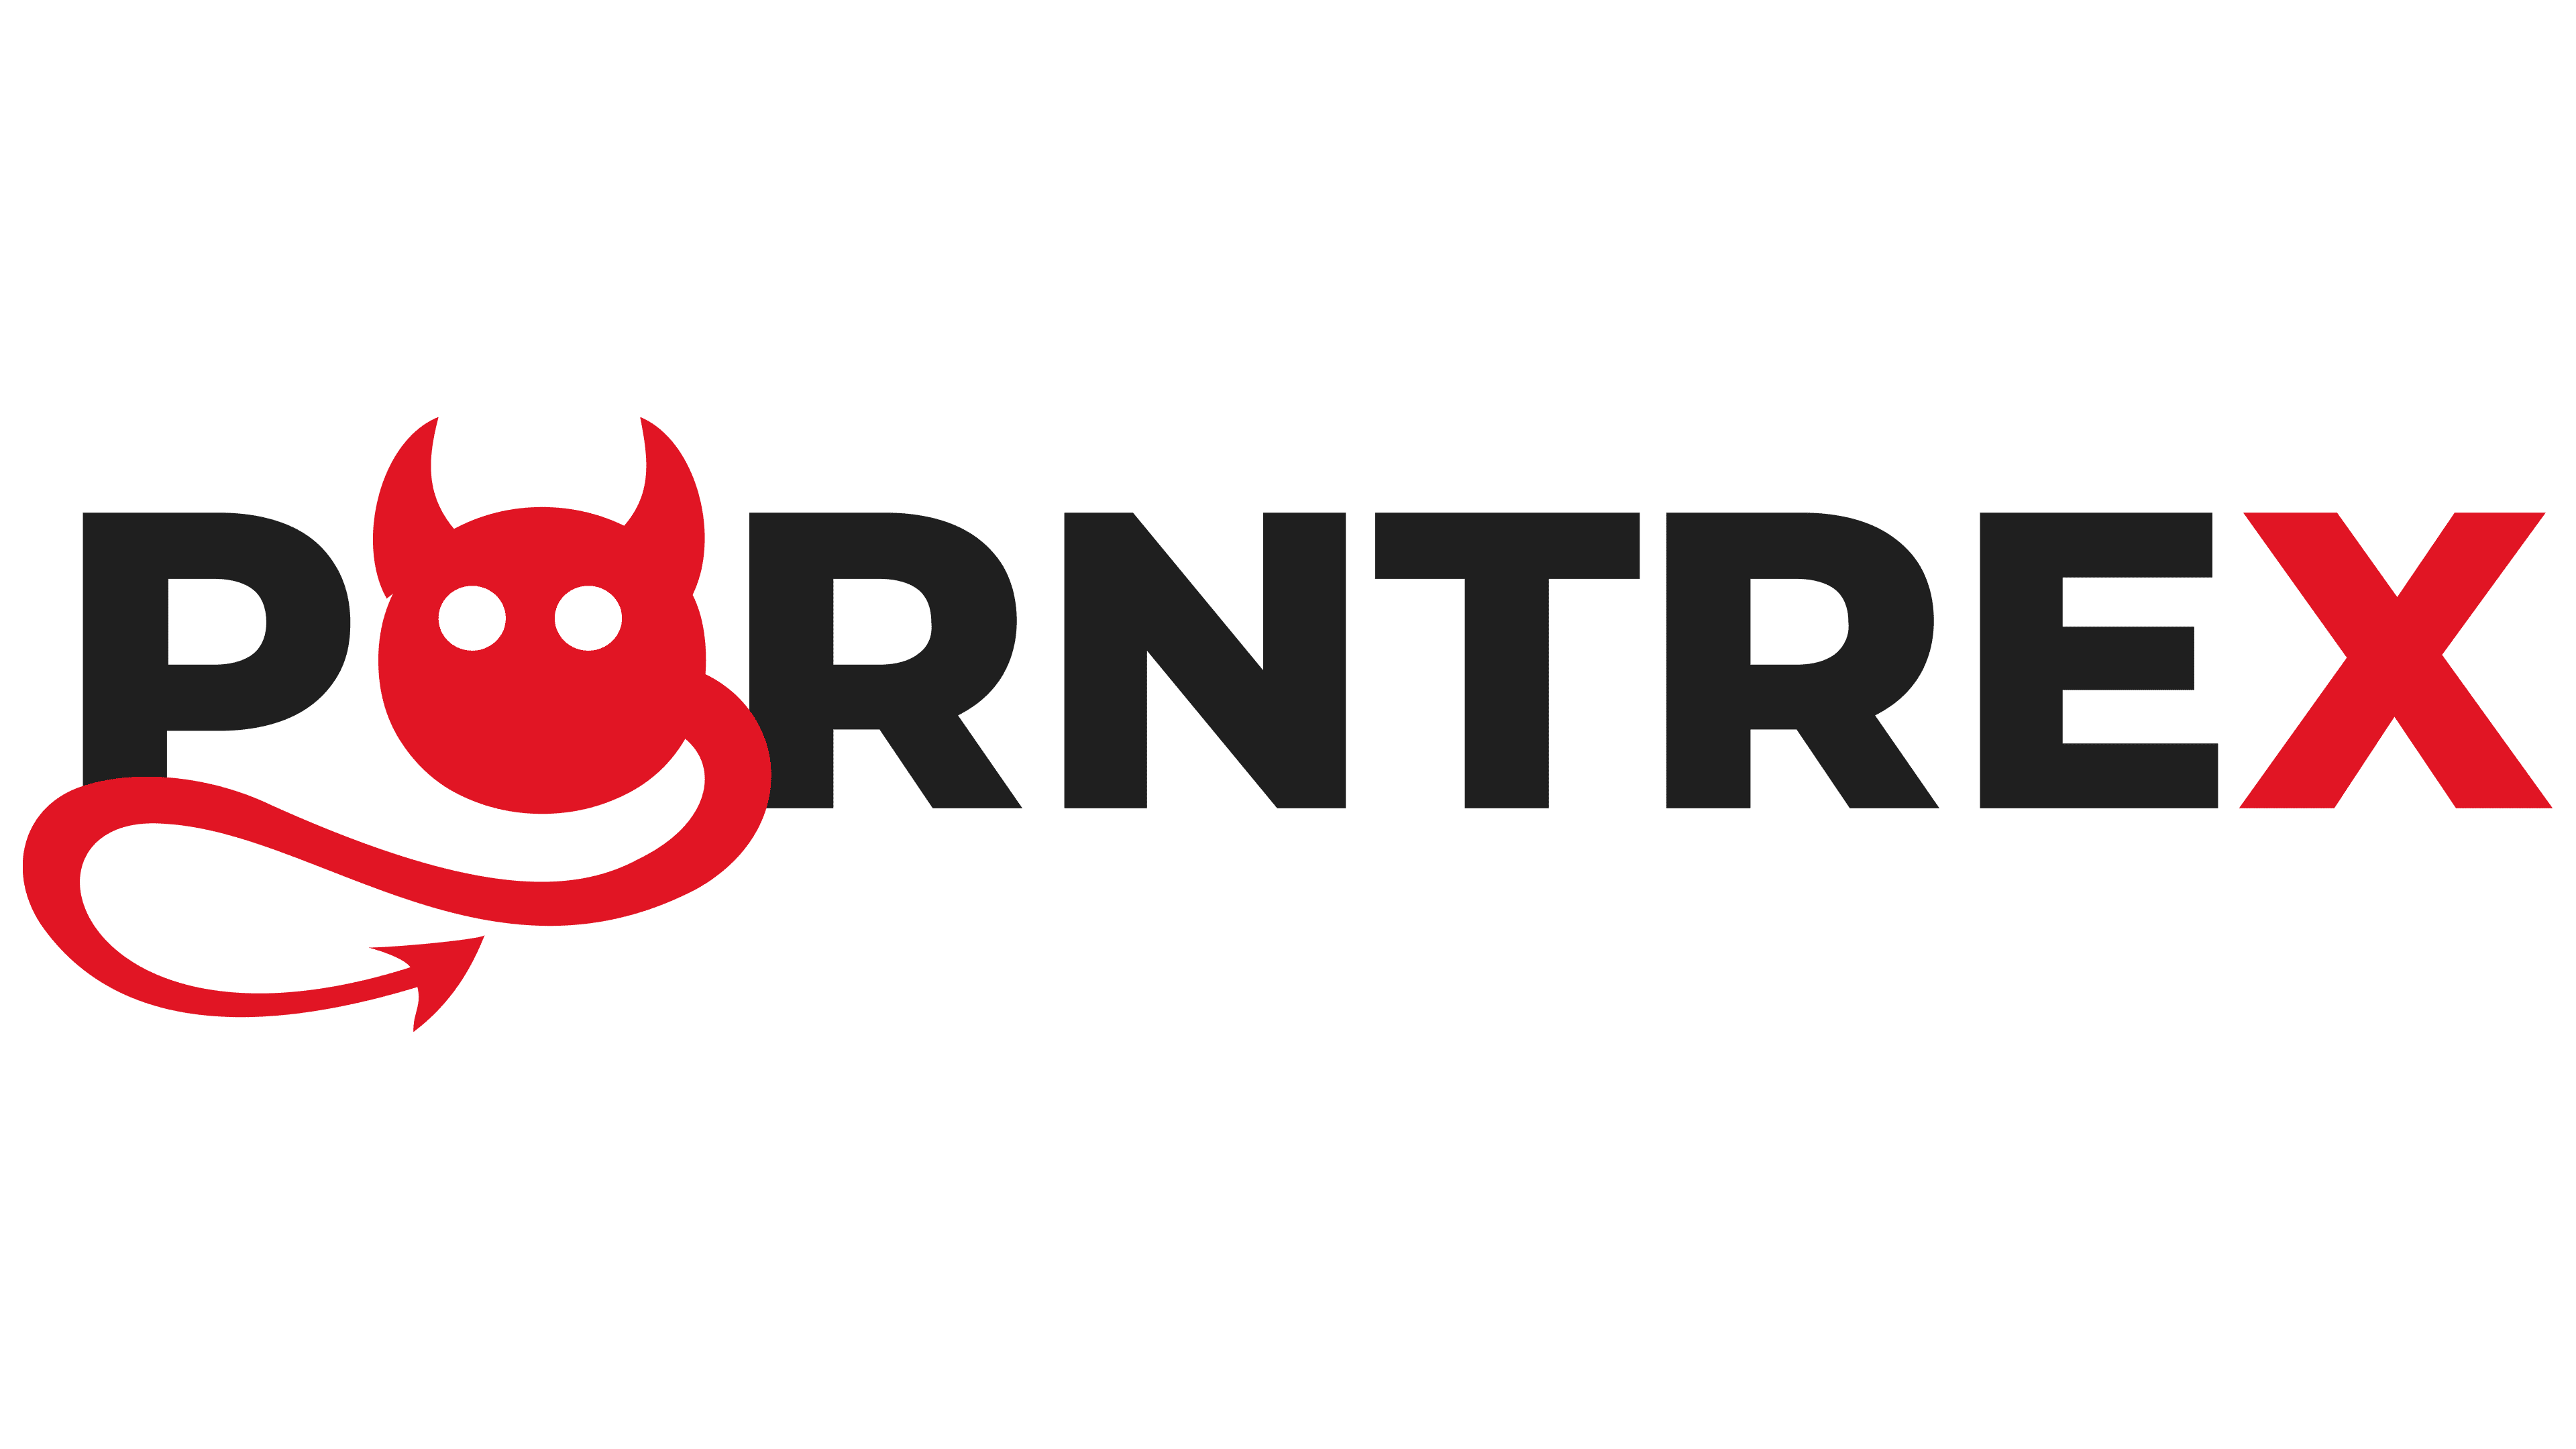 PornTrex Logo, symbol, meaning, history, PNG, brand